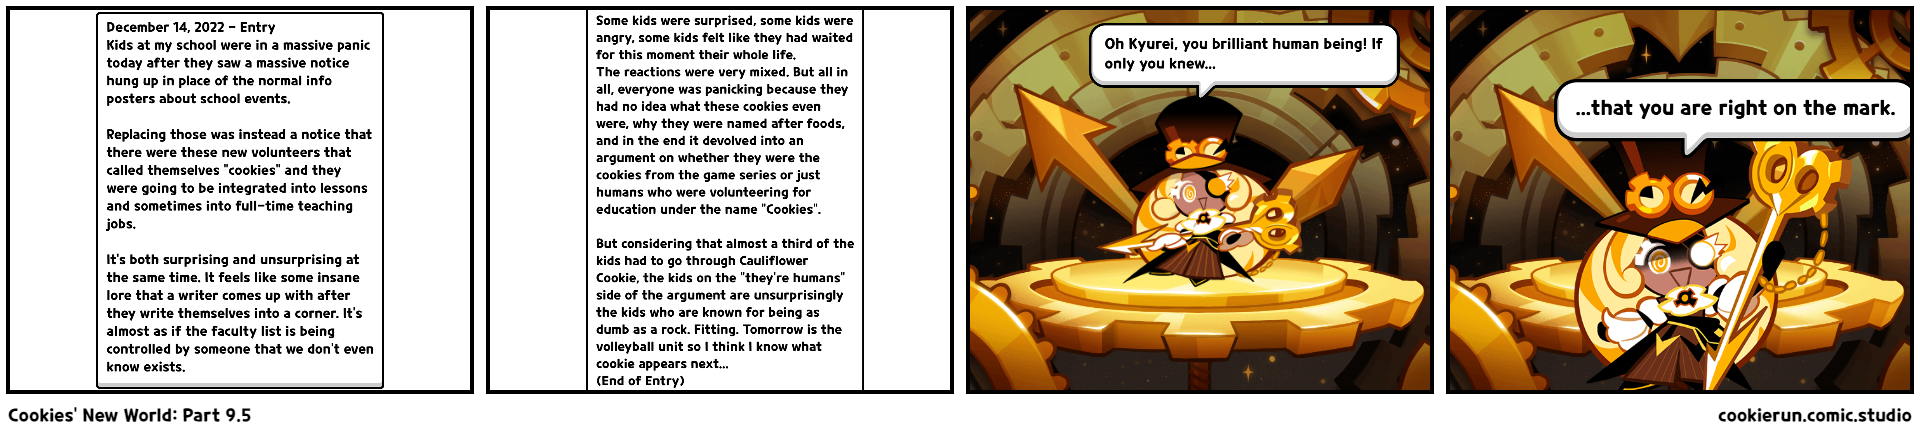 Cookies' New World: Part 9.5